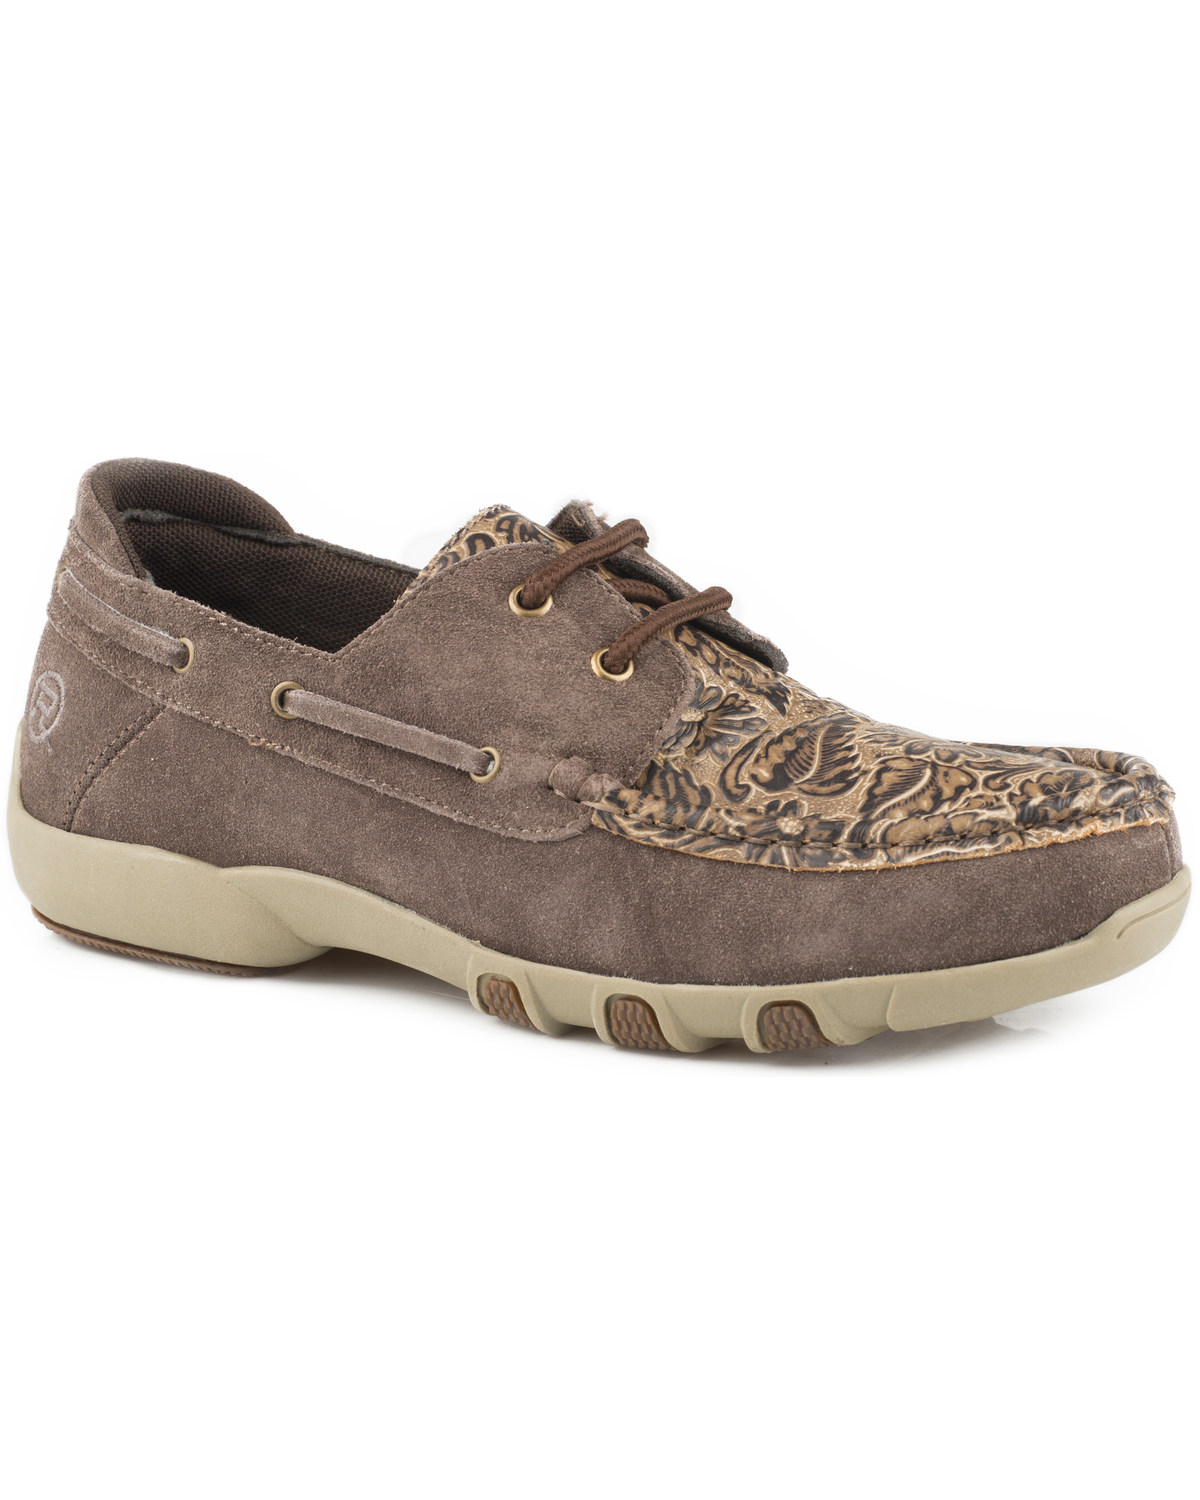 Driving Moc Boat Shoes 